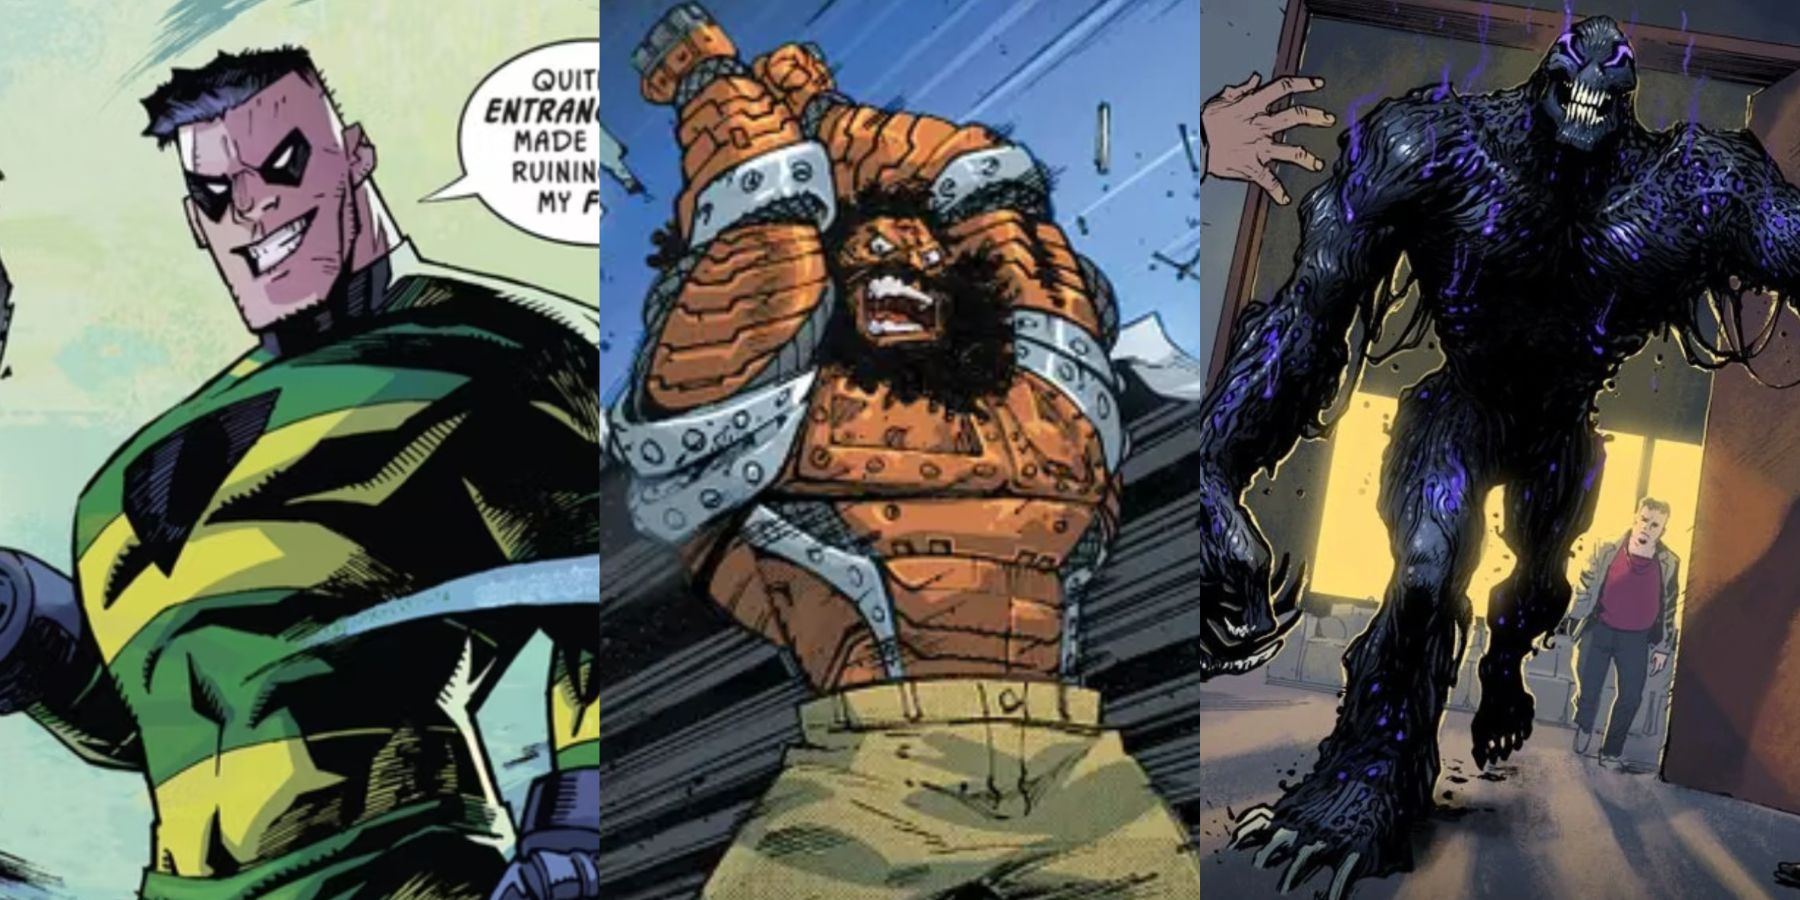 A split image features Top, Girder, and Tar-Pile as they appear in the Flash movie prequel comics